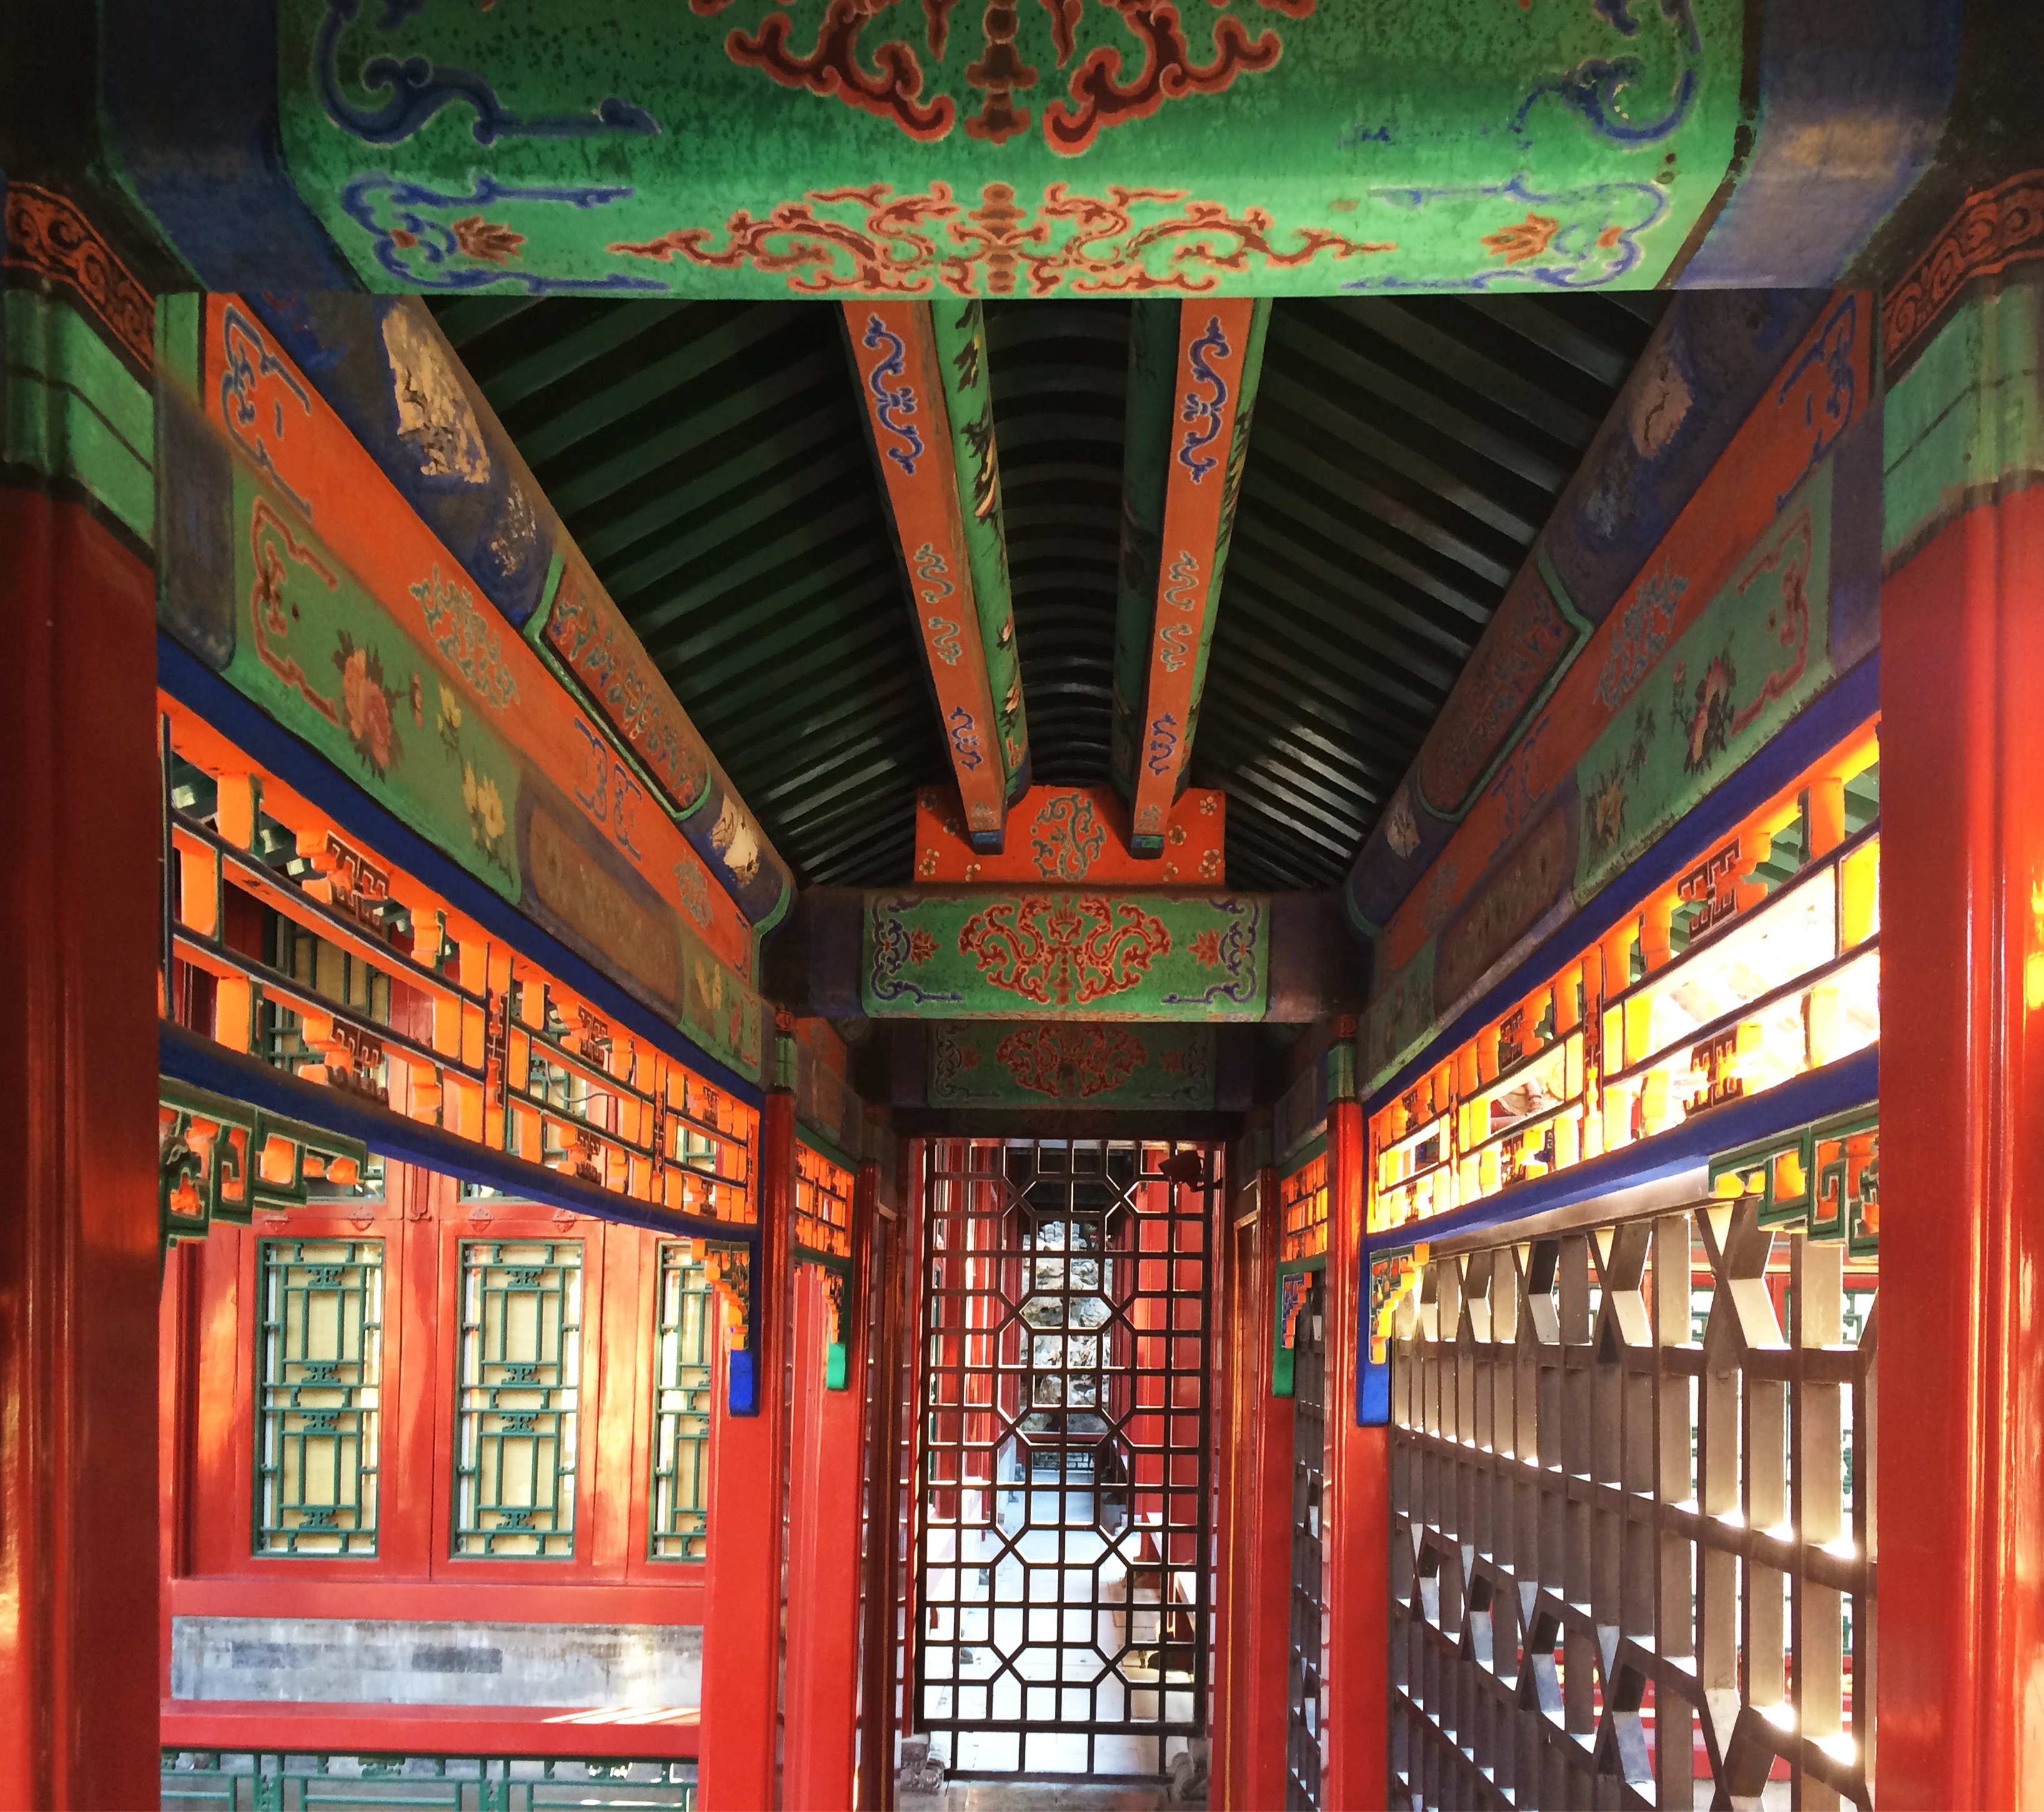 A strong colored hallway in an Asian building